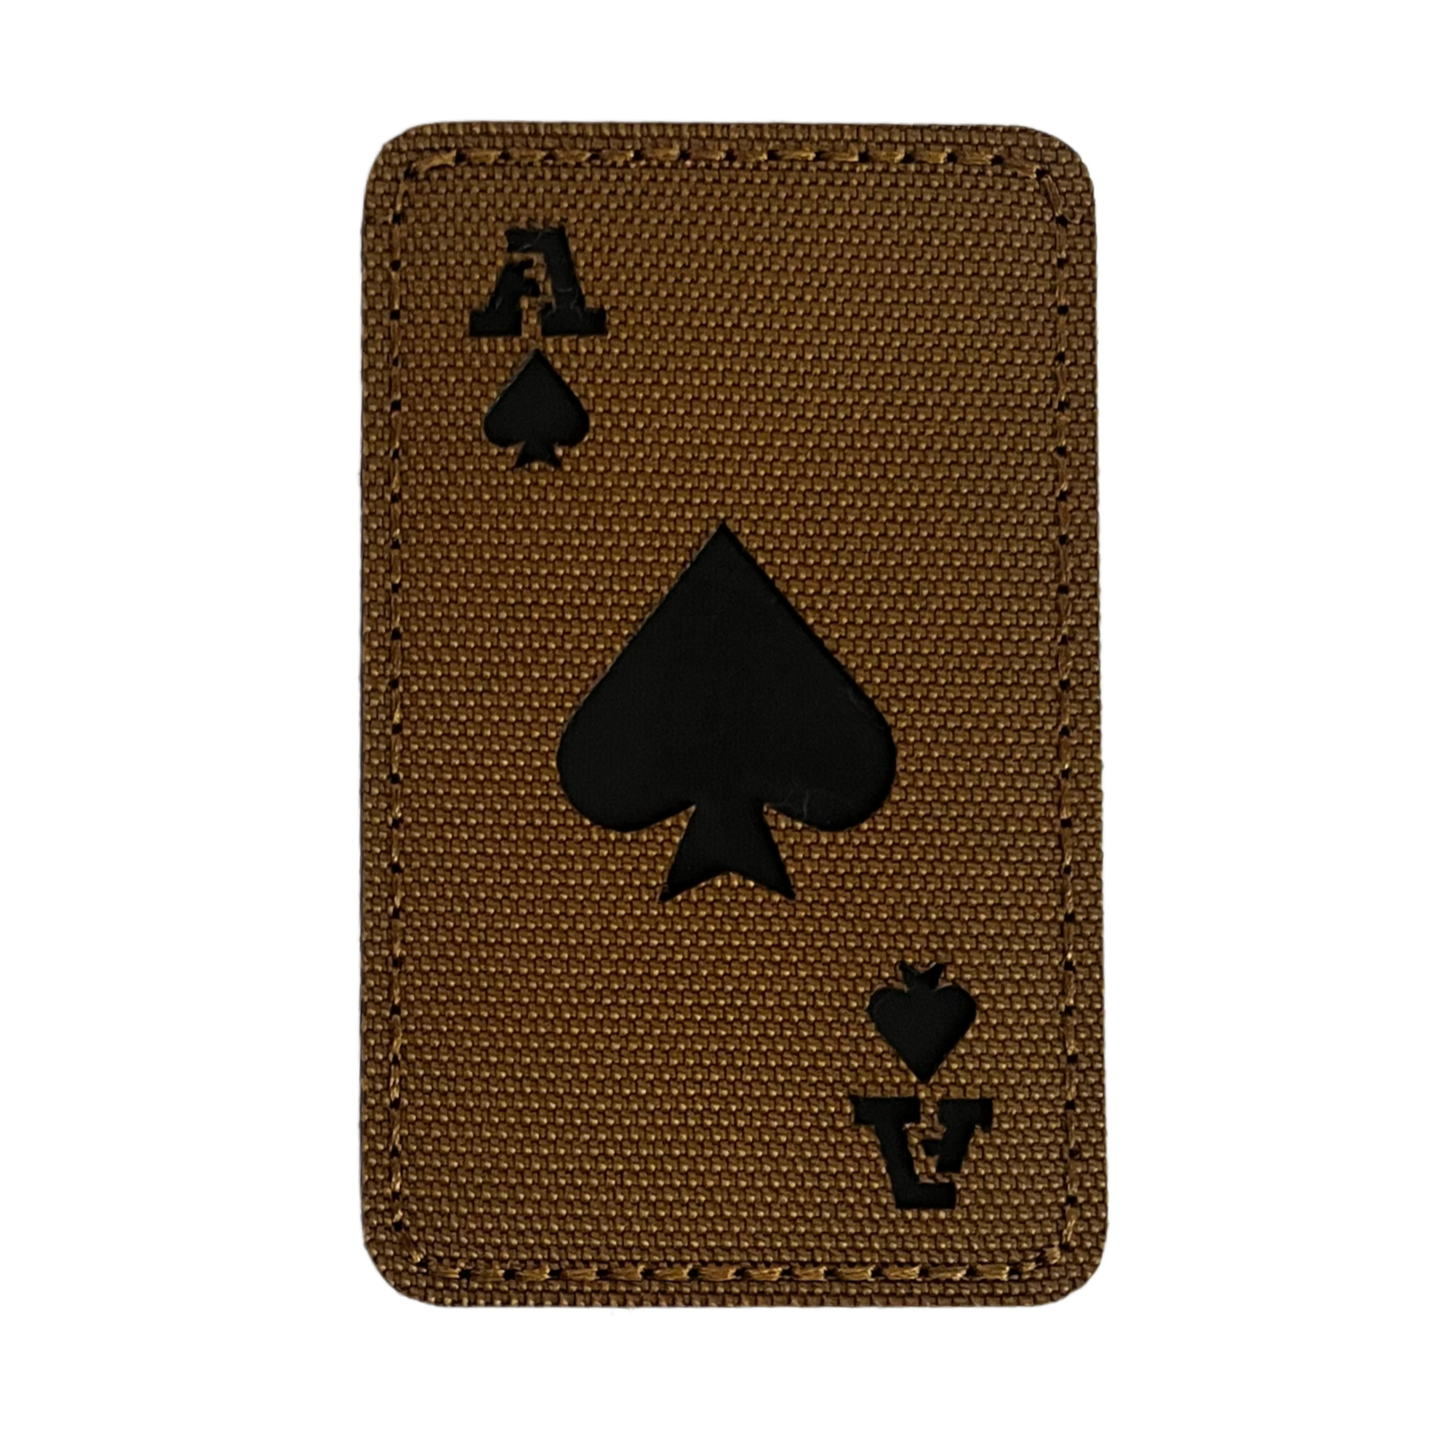 Ace of Spades Sewn Patch (Coyote Brown)